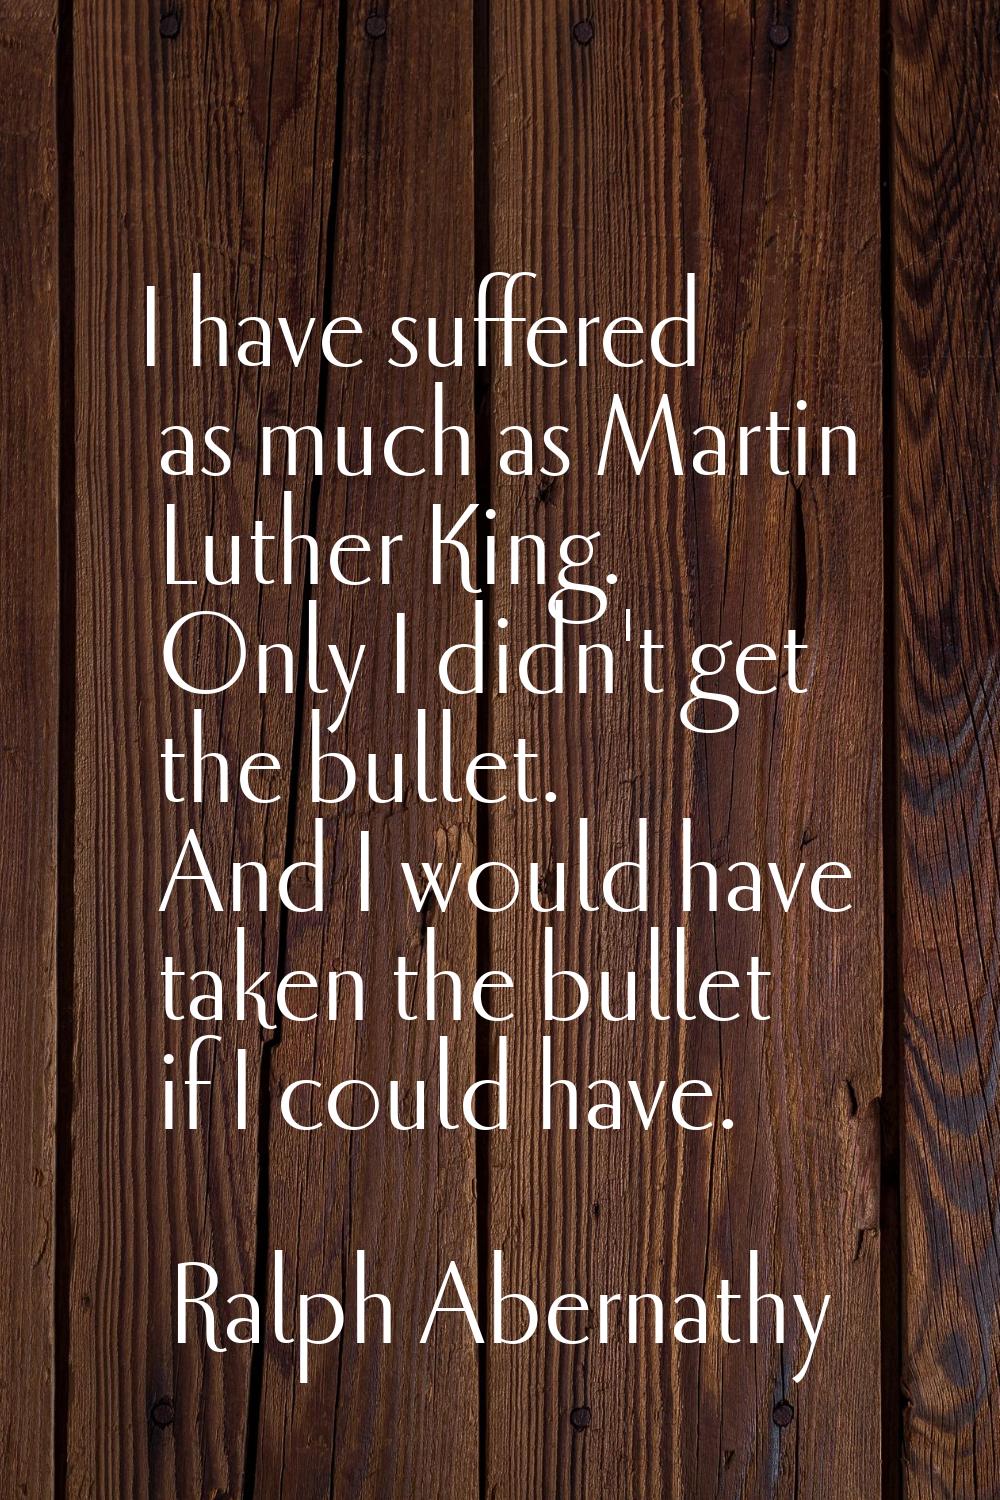 I have suffered as much as Martin Luther King. Only I didn't get the bullet. And I would have taken